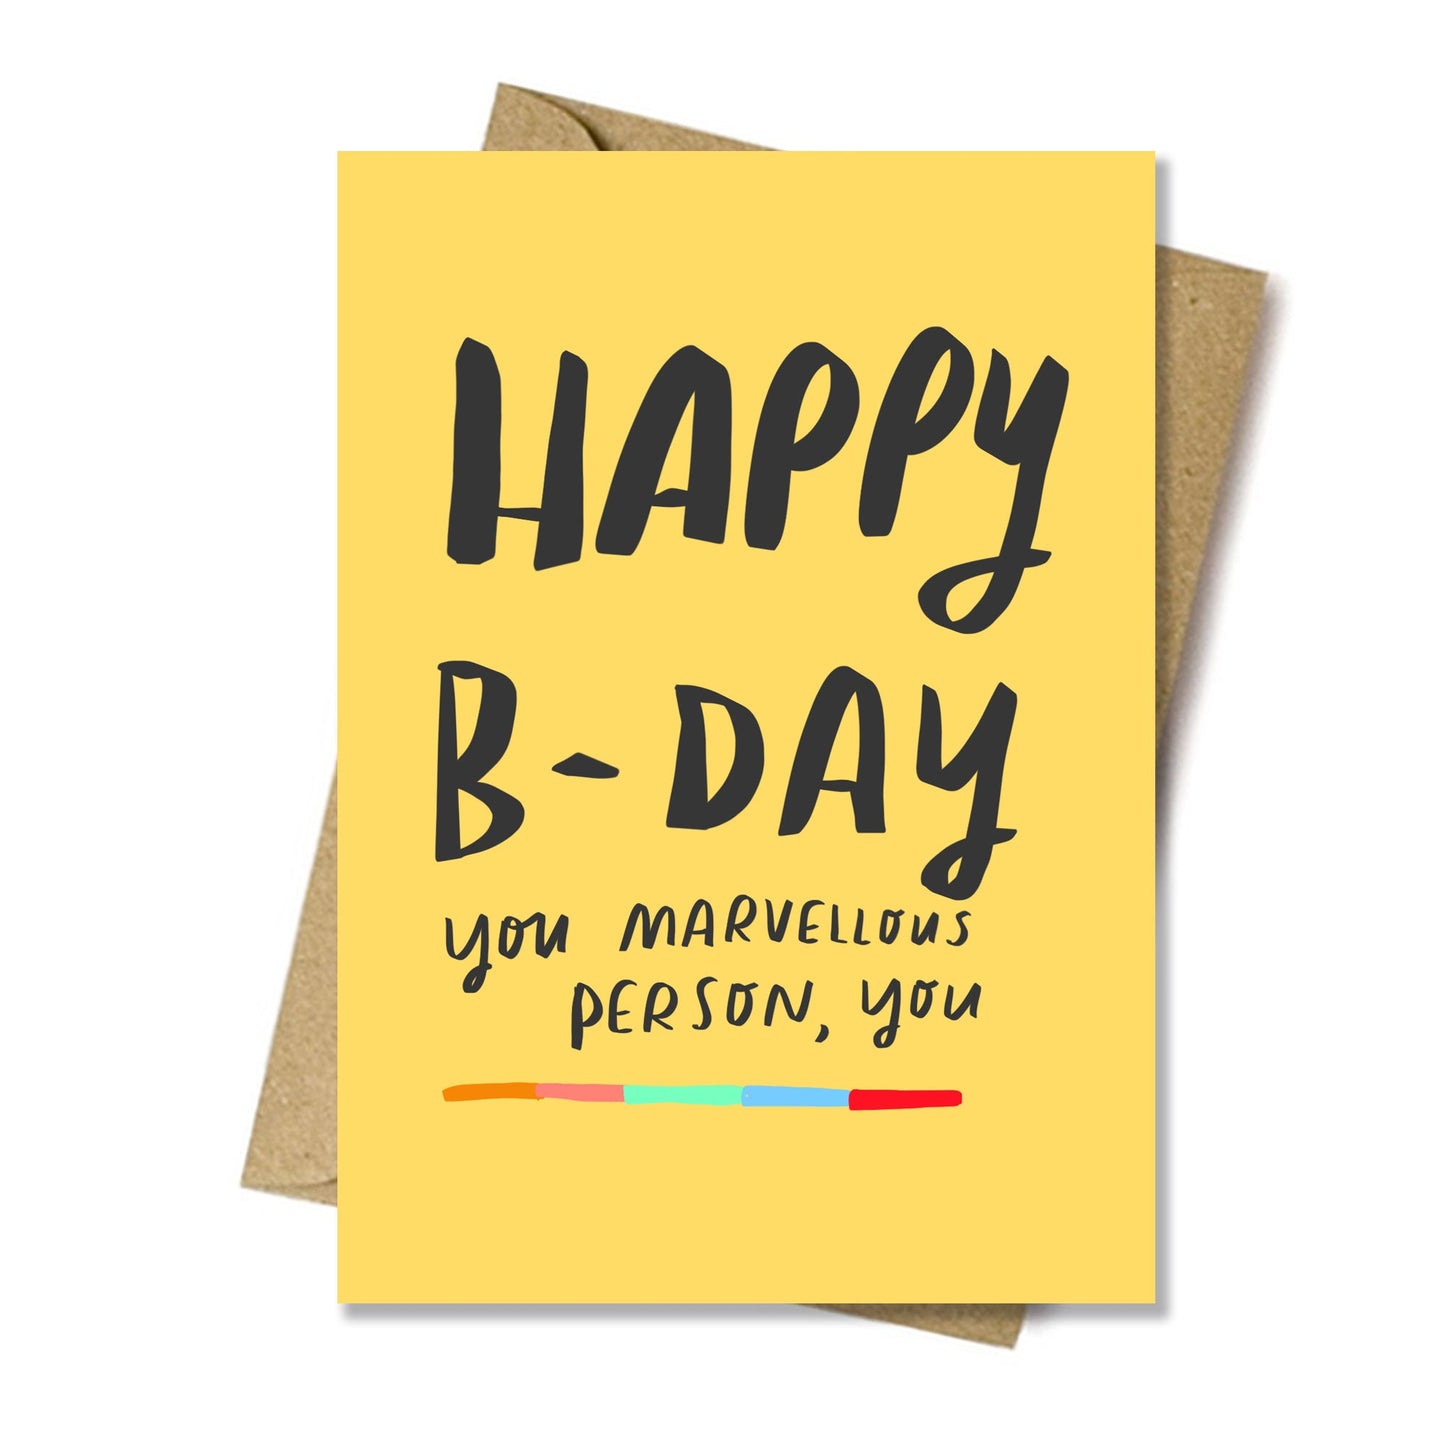 Marvellous person birthday card